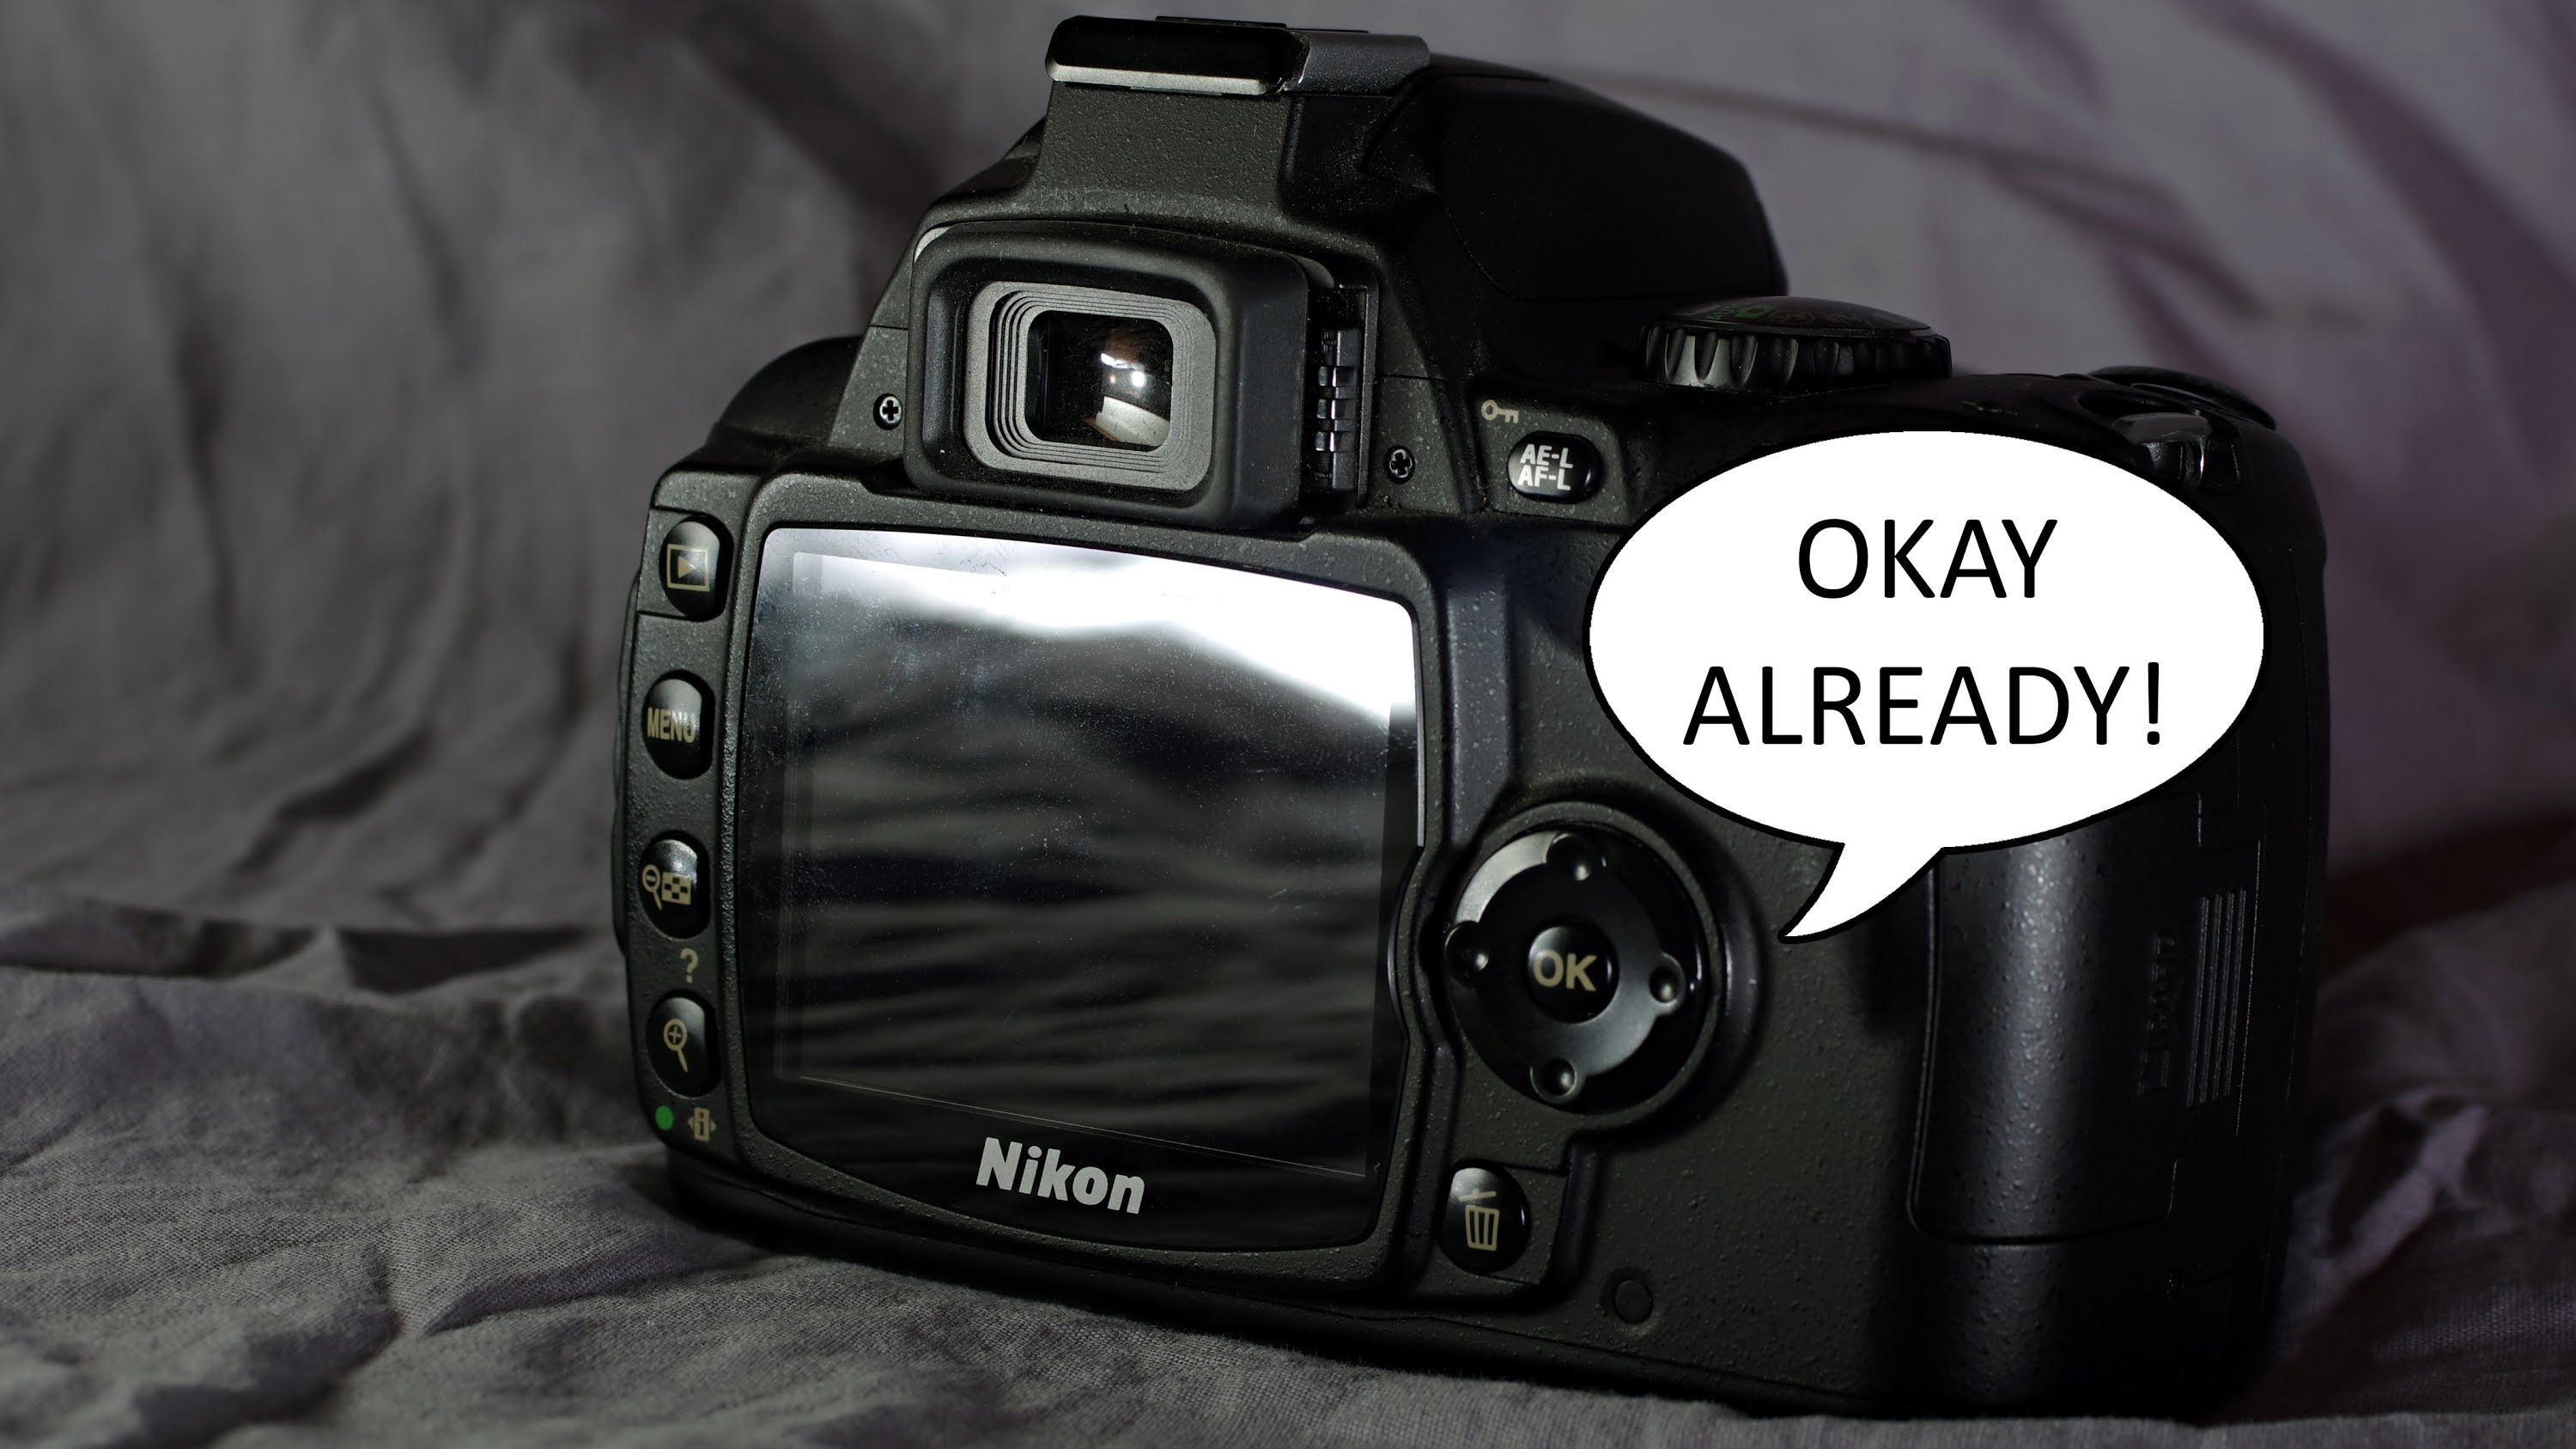 Introduction to the Nikon D40, Video 6 of 12 (Sensor and ISO)